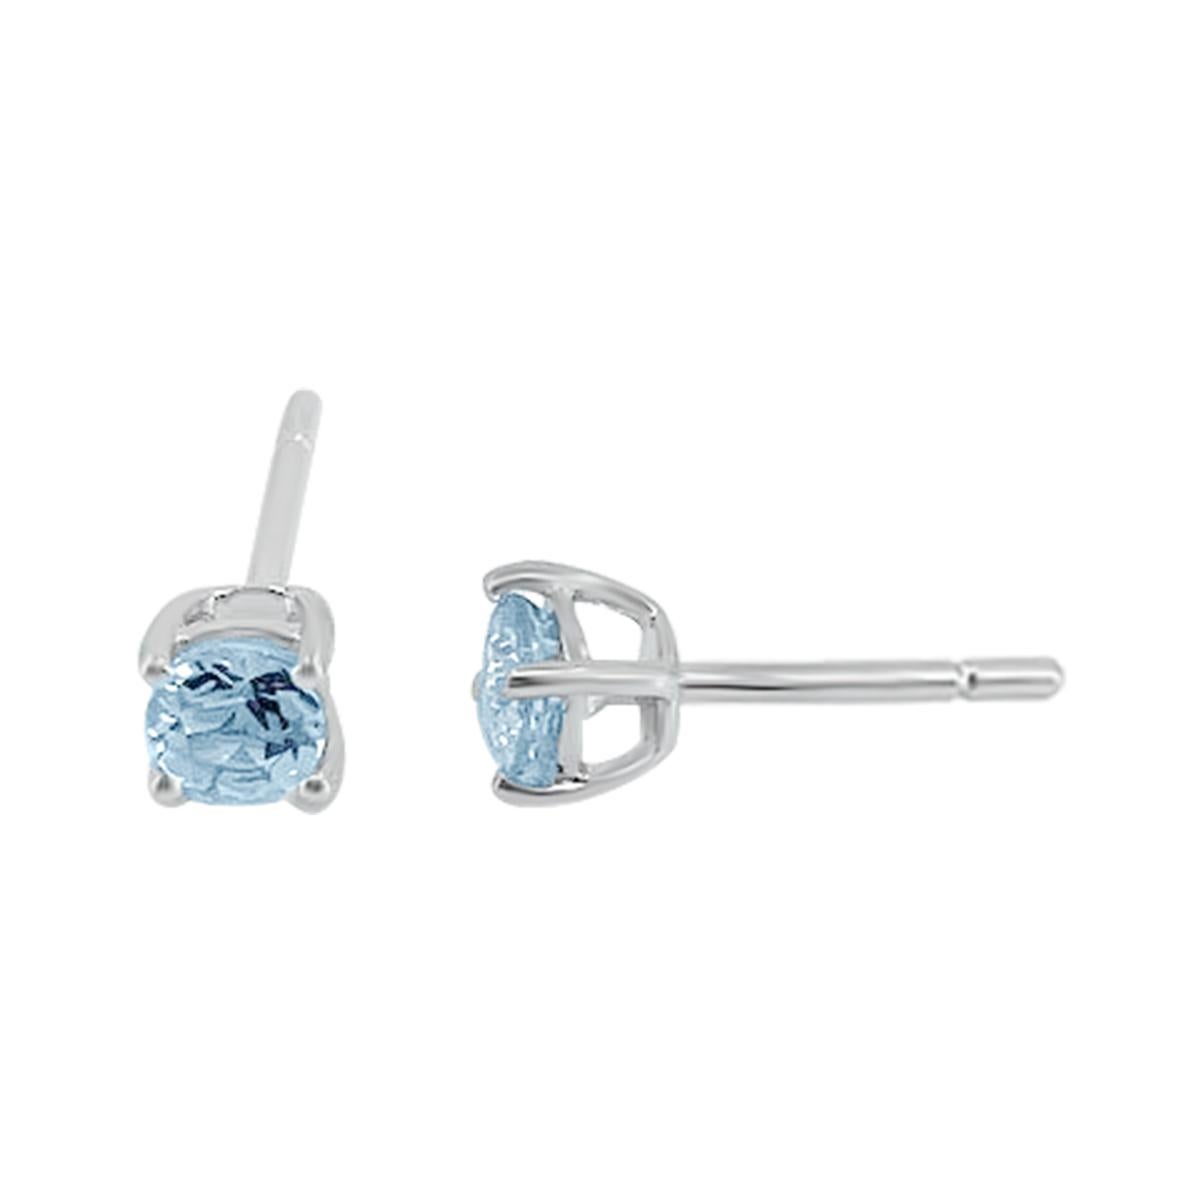 The Stunning pair Of Aqua Blue Stud Earring Featuring  Brilliant Round Cut Aquamarine Gemstones. Set In Classic Four Prong Setting Crafted In 14K White Gold.
This Beautiful Pair Of 4mm Round Aquamarine Studs Are The Perfect Way To Add Class And